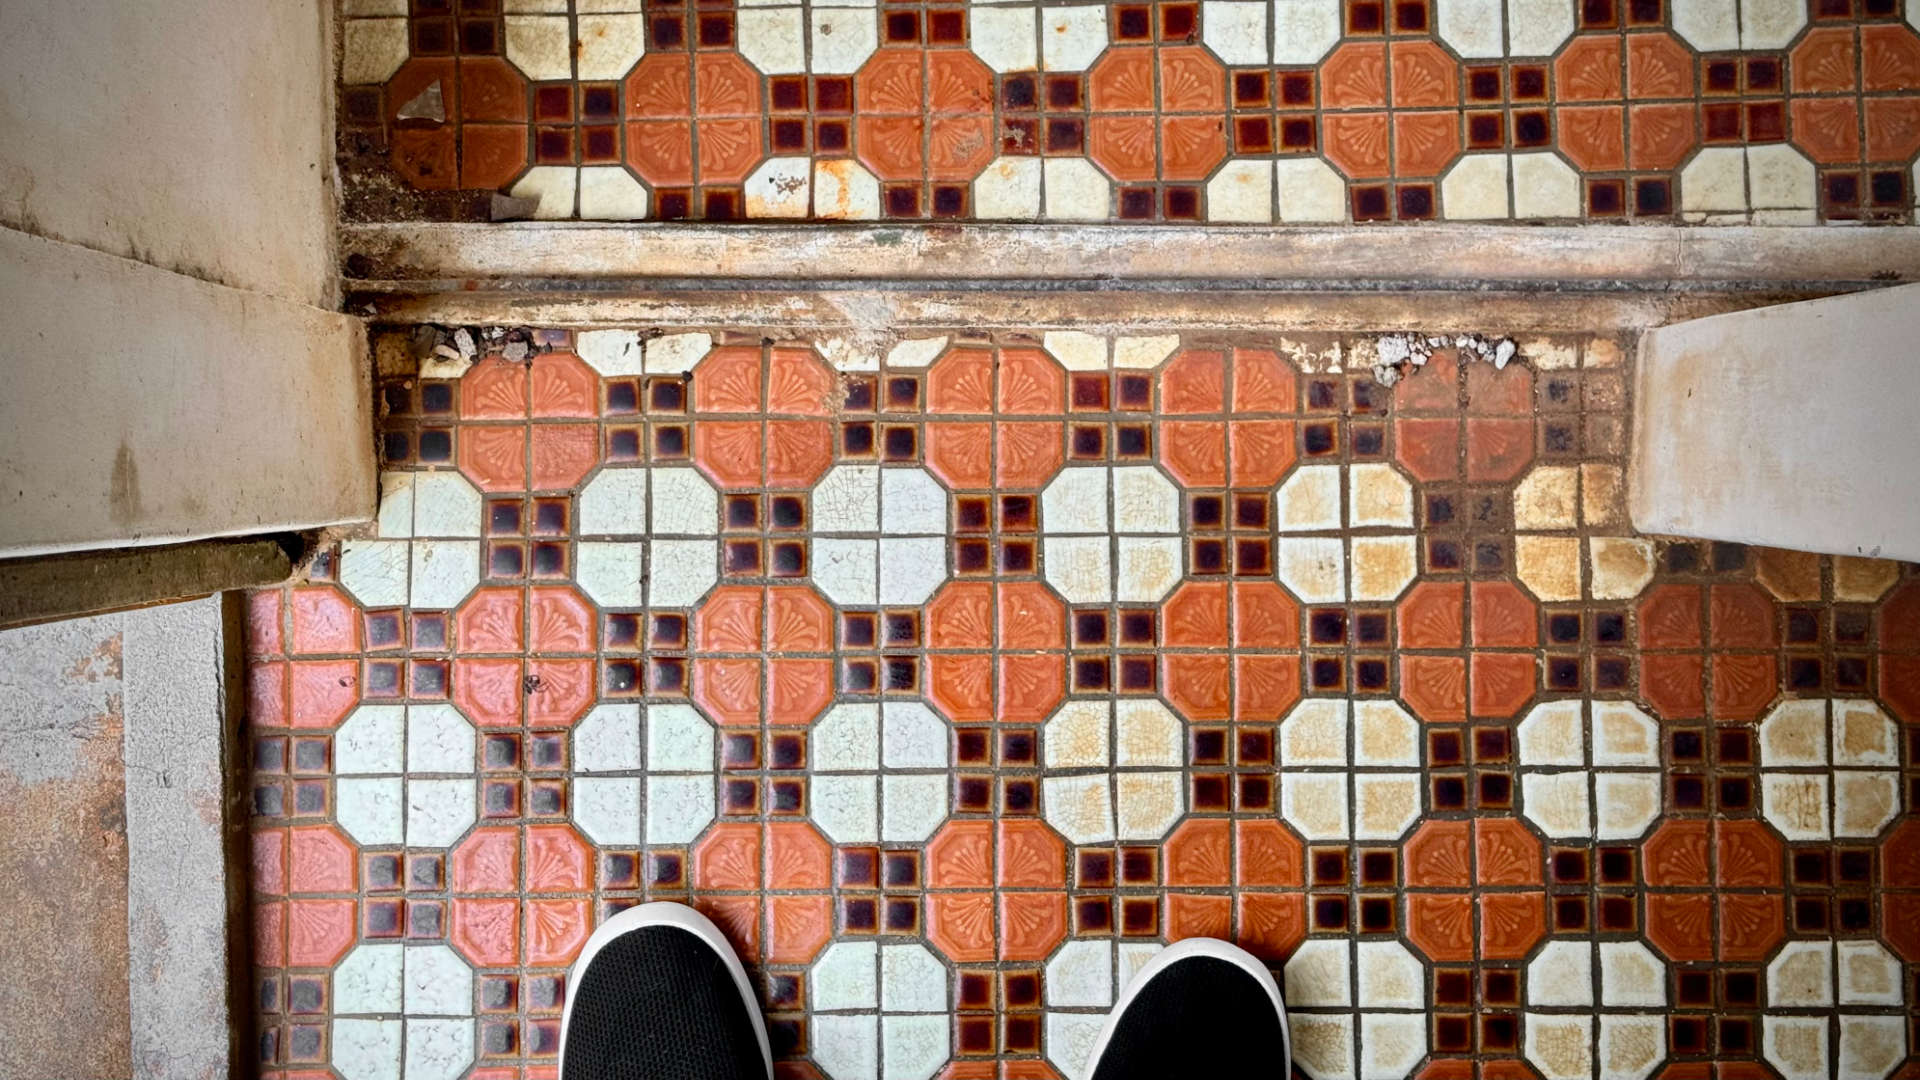 A slightly-crooked tiled floor in an abandoned building.